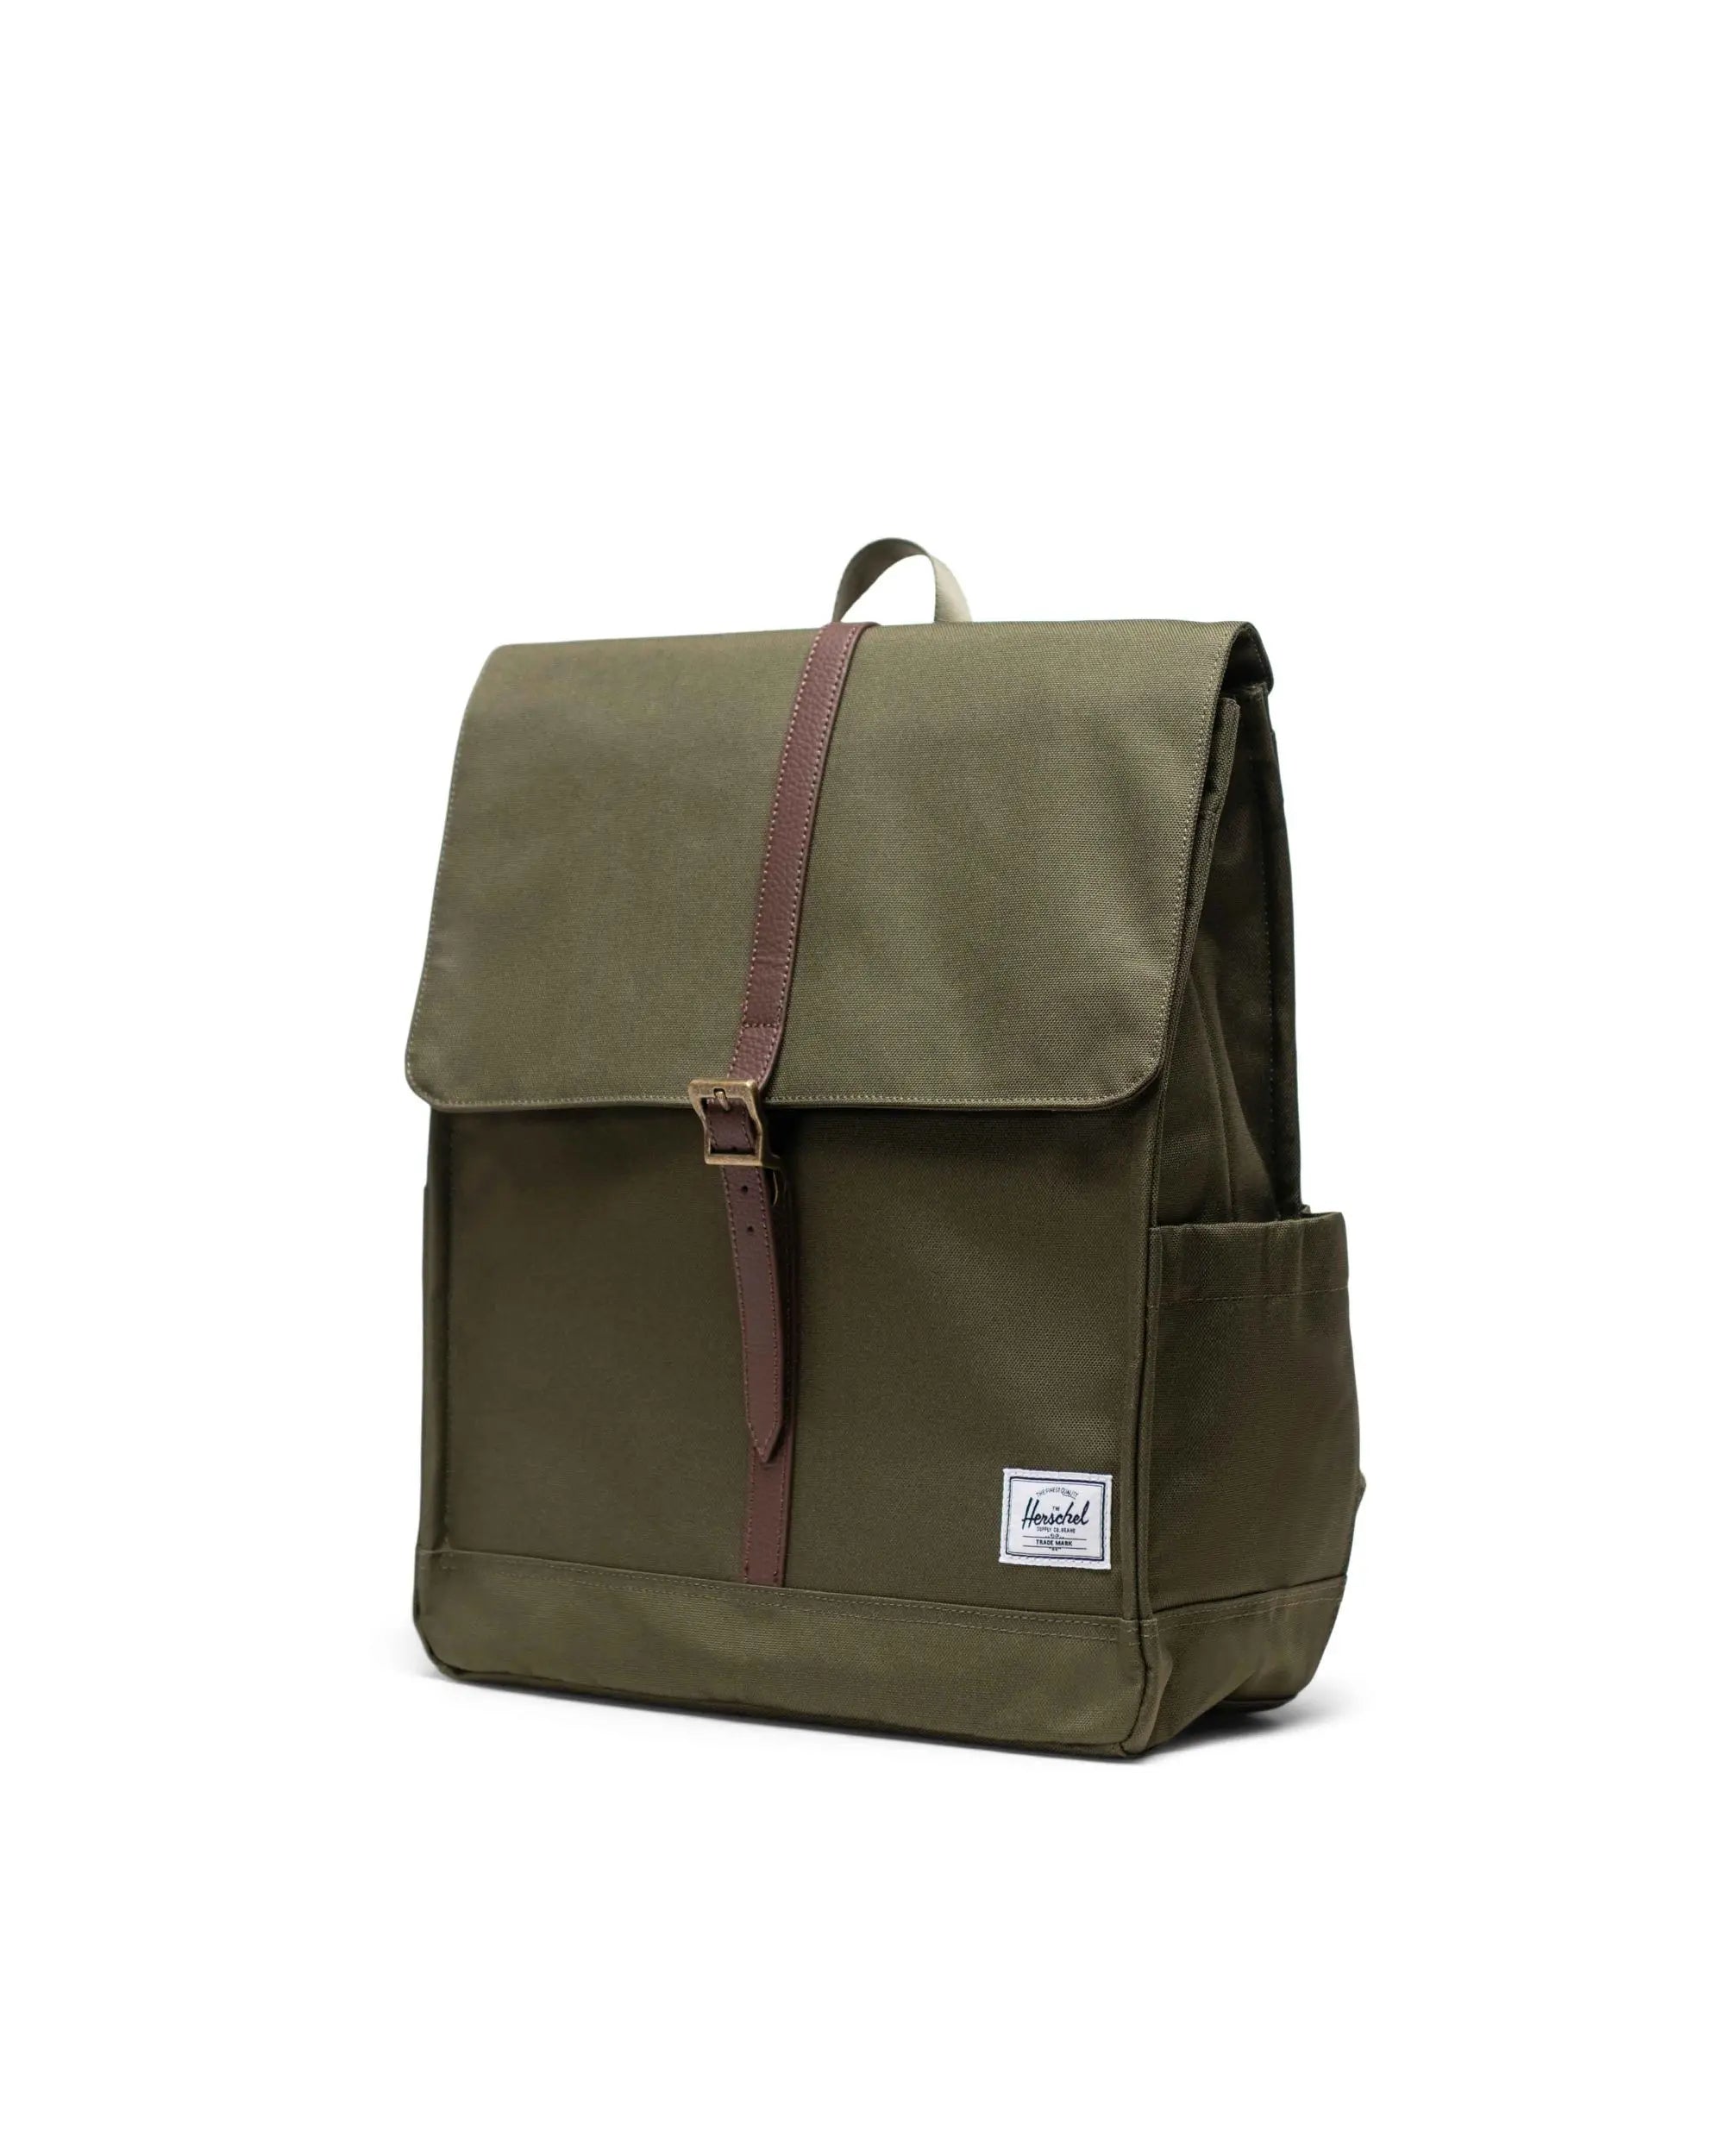 City Backpack - 16L - IVY GREEN-04281